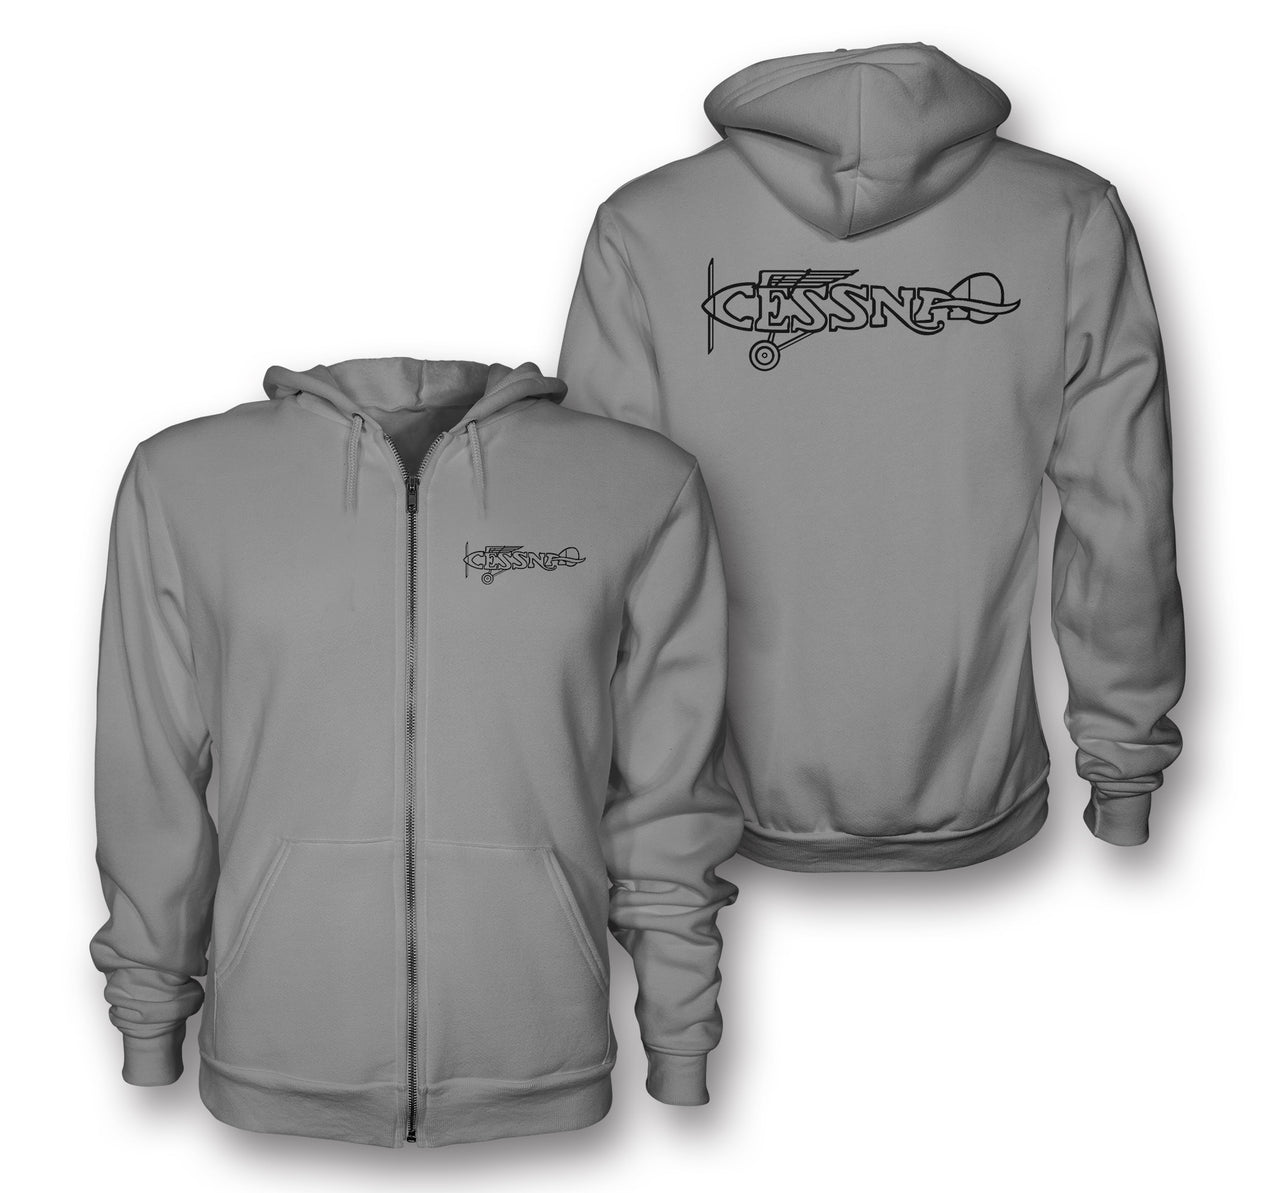 Special Cessna Text Designed Zipped Hoodies